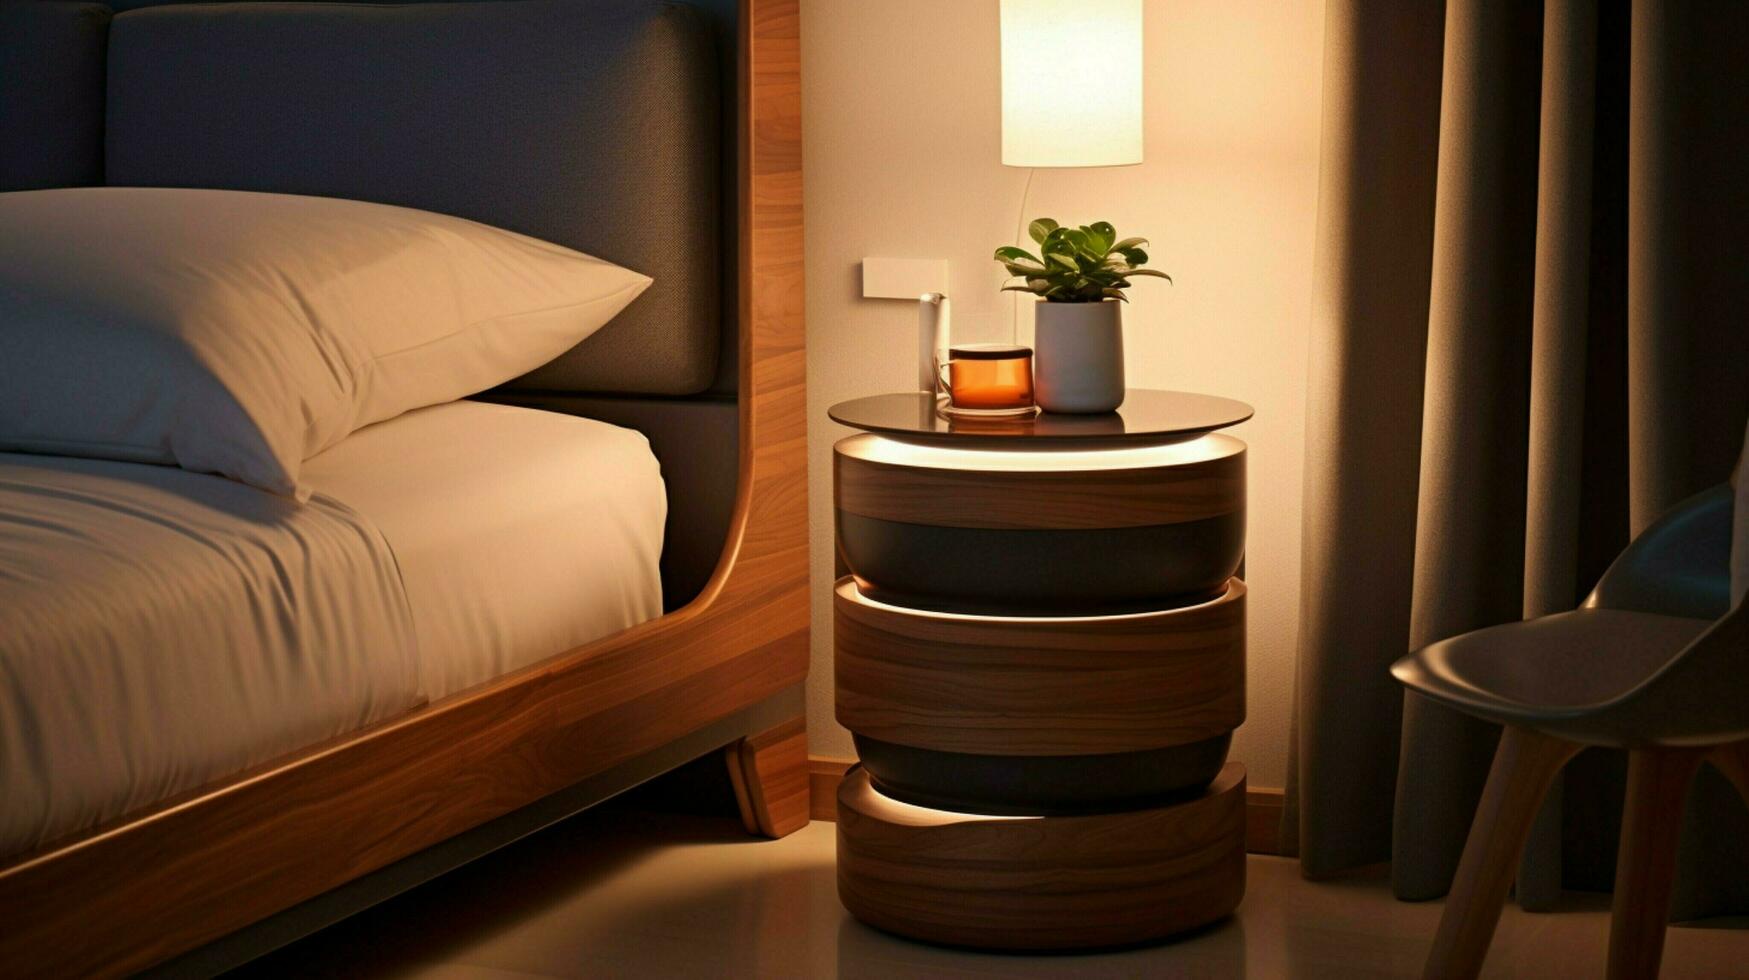 bedside table with modern tech for relaxation photo